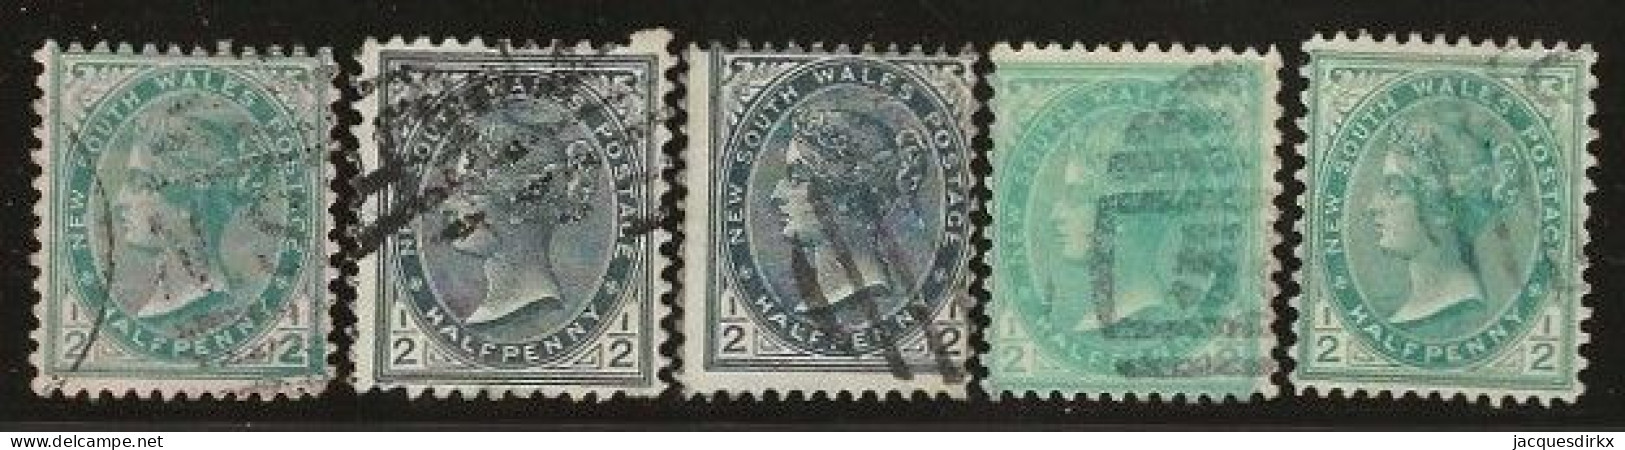 New South Wales      .   SG    .   271/273      .   O      .     Cancelled - Used Stamps